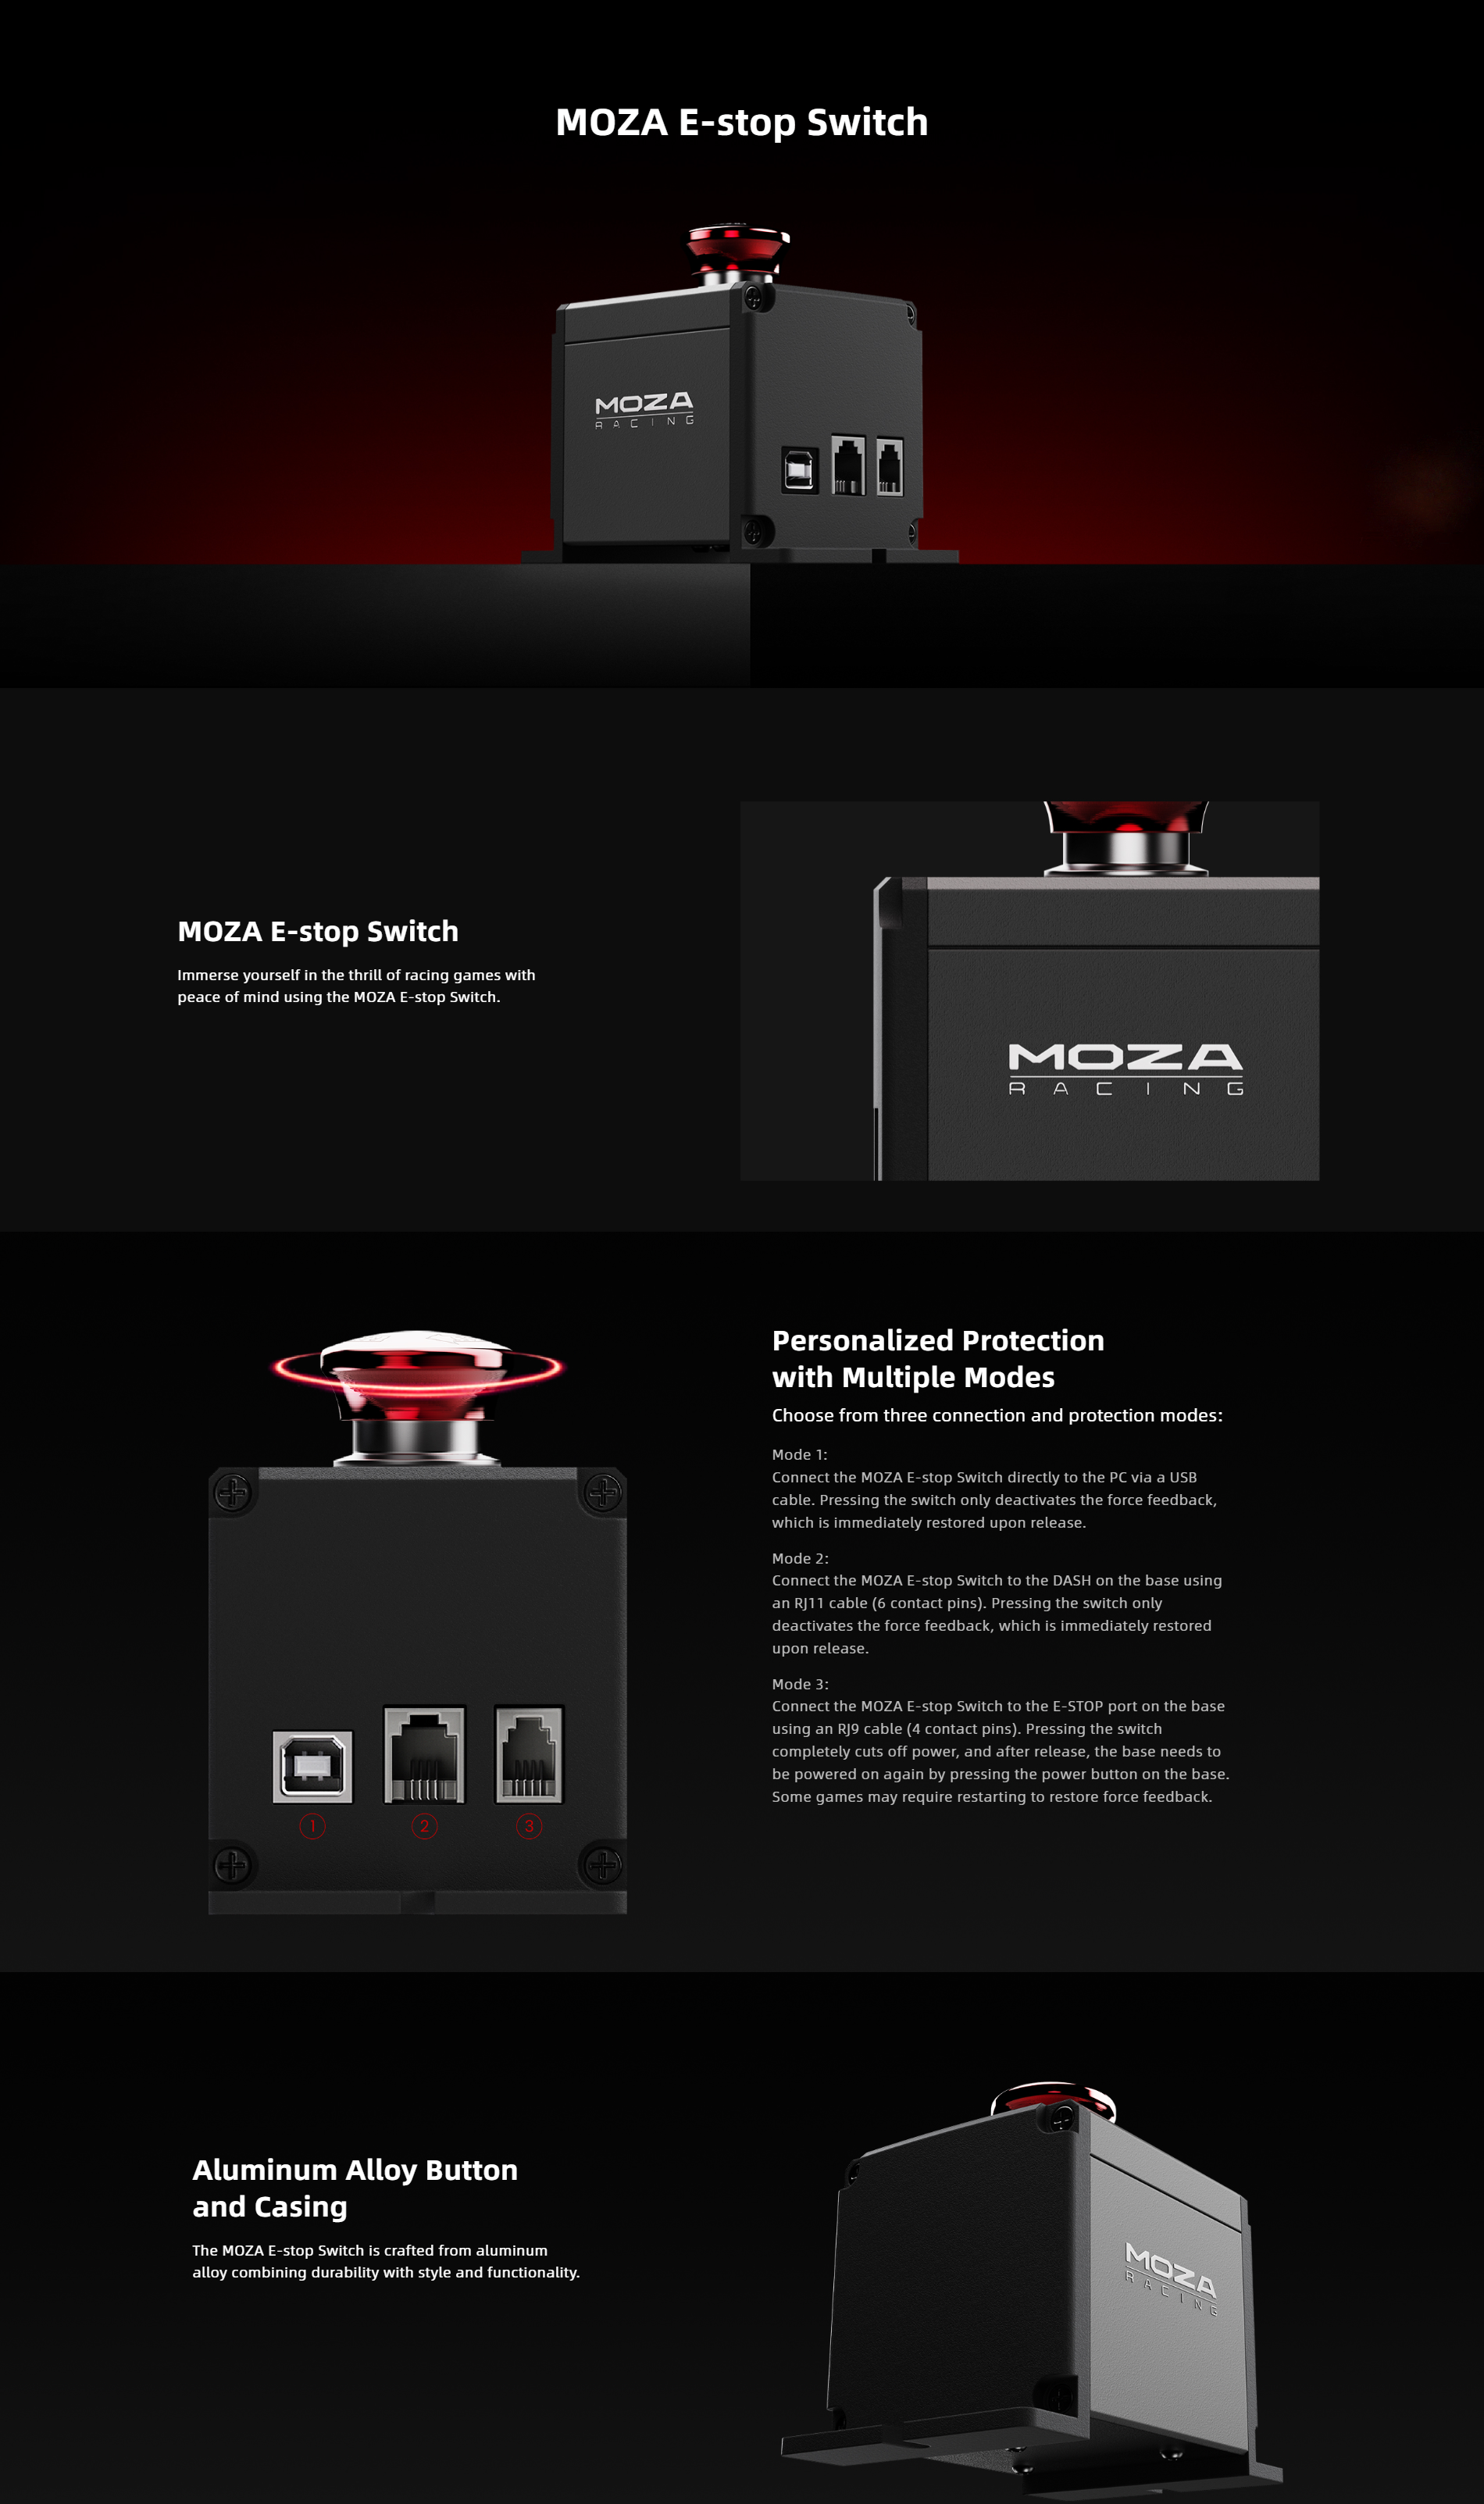 A large marketing image providing additional information about the product MOZA E-Stop Switch - Additional alt info not provided